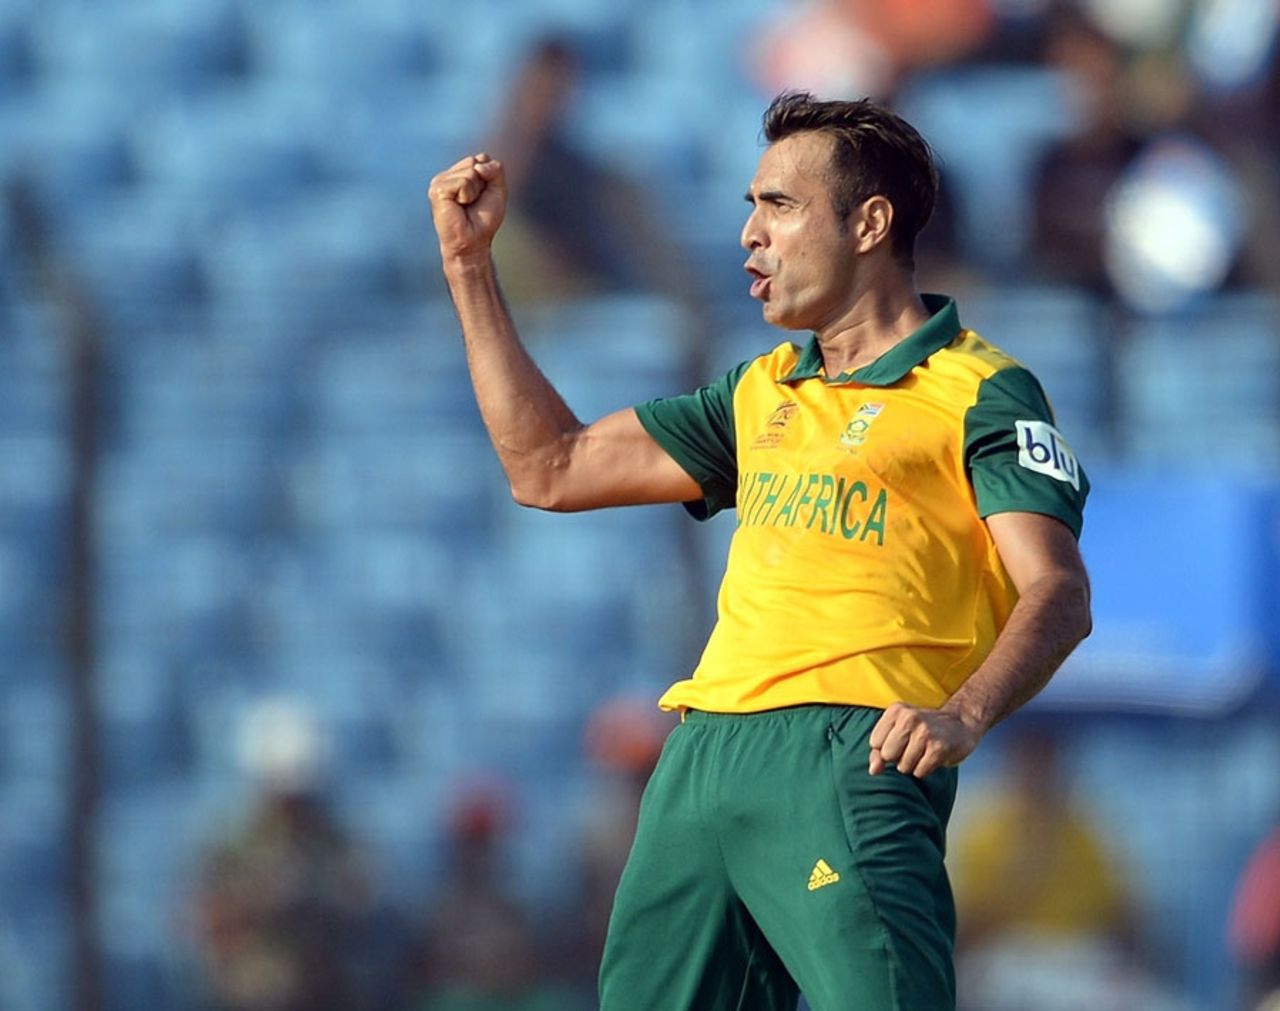 Imran Tahir hampered Sri Lank's progress in the middle overs, South Africa v Sri Lanka, World T20, Group 1, Chittagong, March 22, 2014 